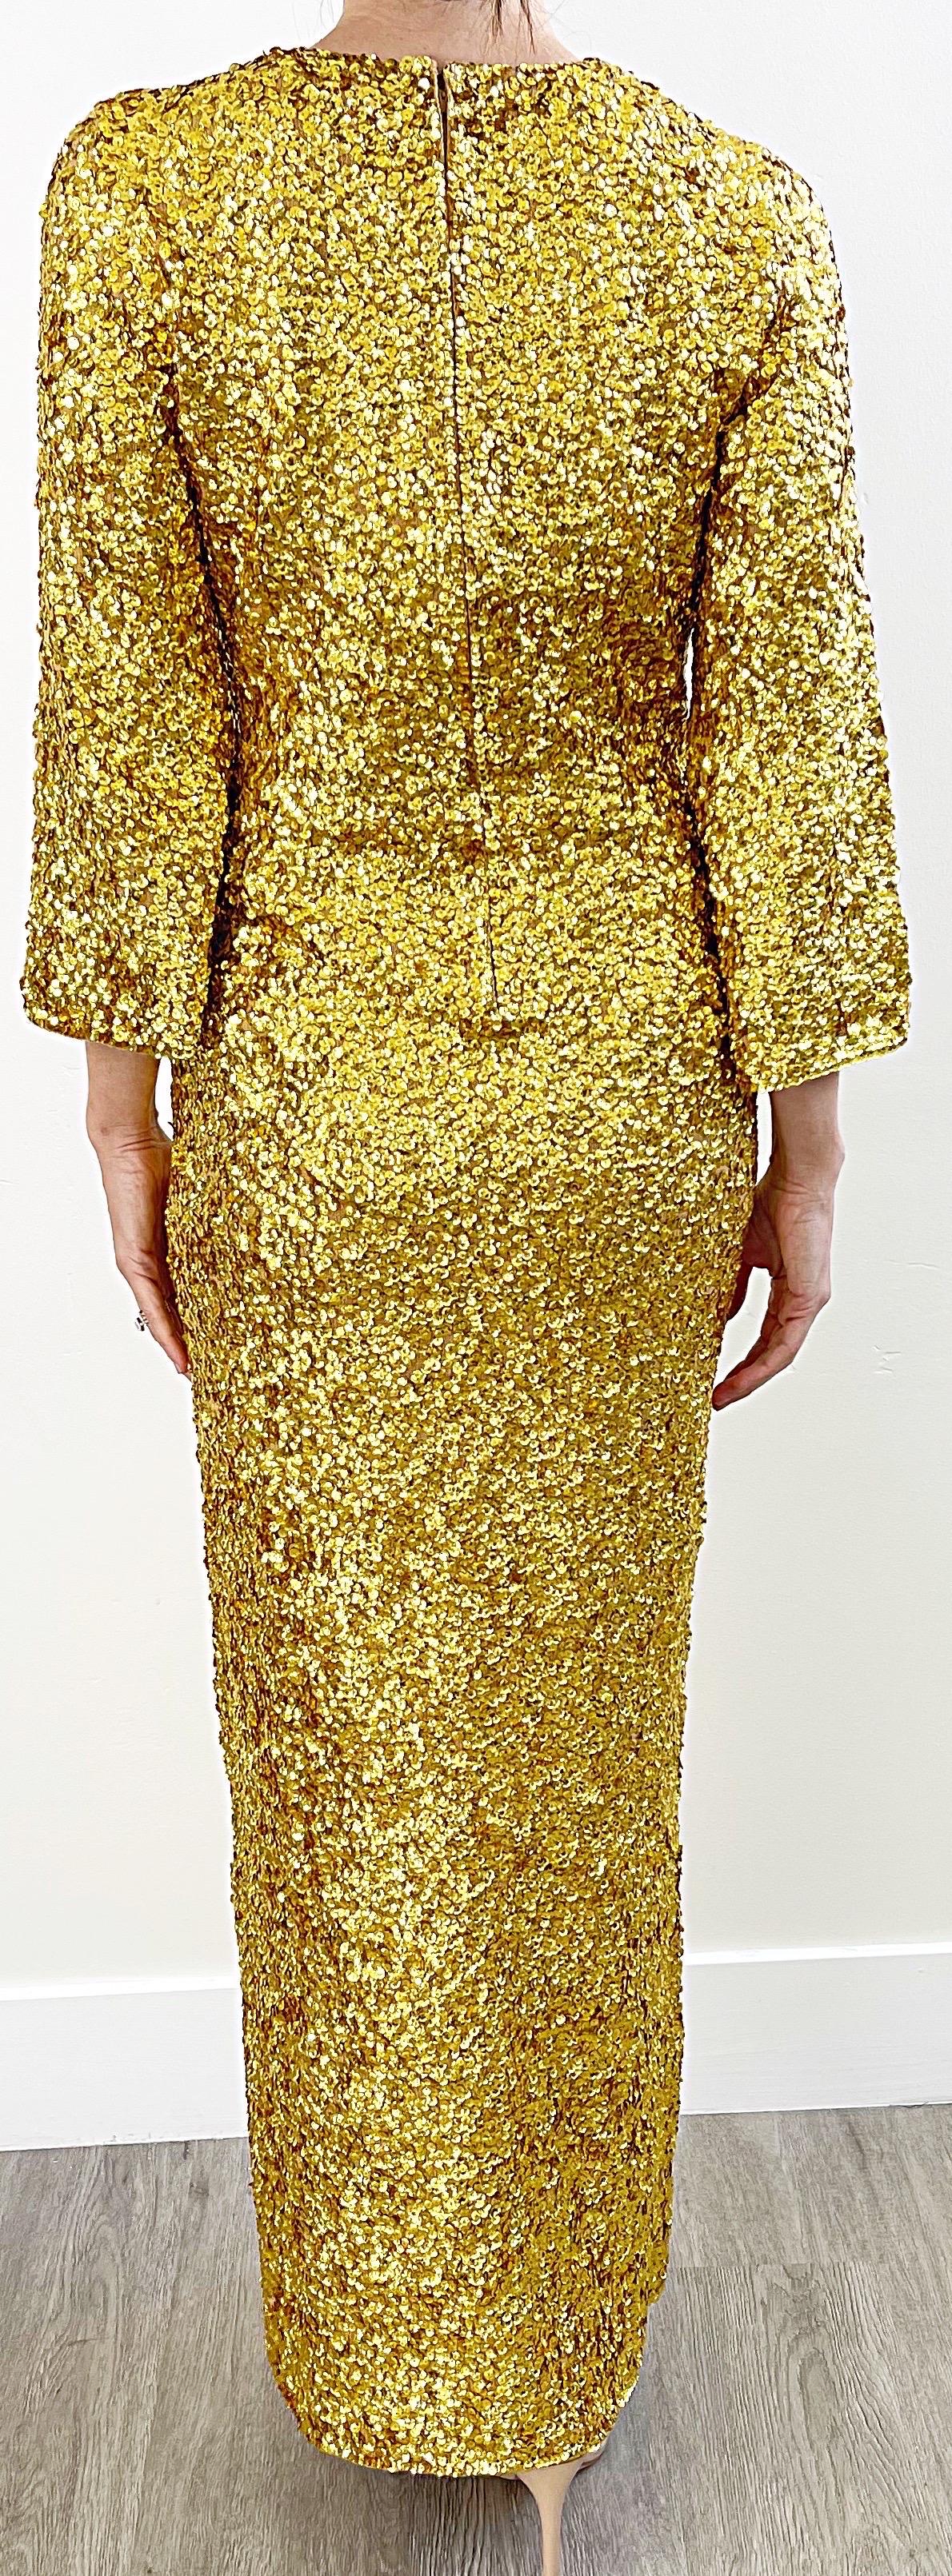 Women's 1960s Gene Shelly’s Gold Sequin Keyhole Long Bell Sleeve Vintage Wool 60s Gown For Sale